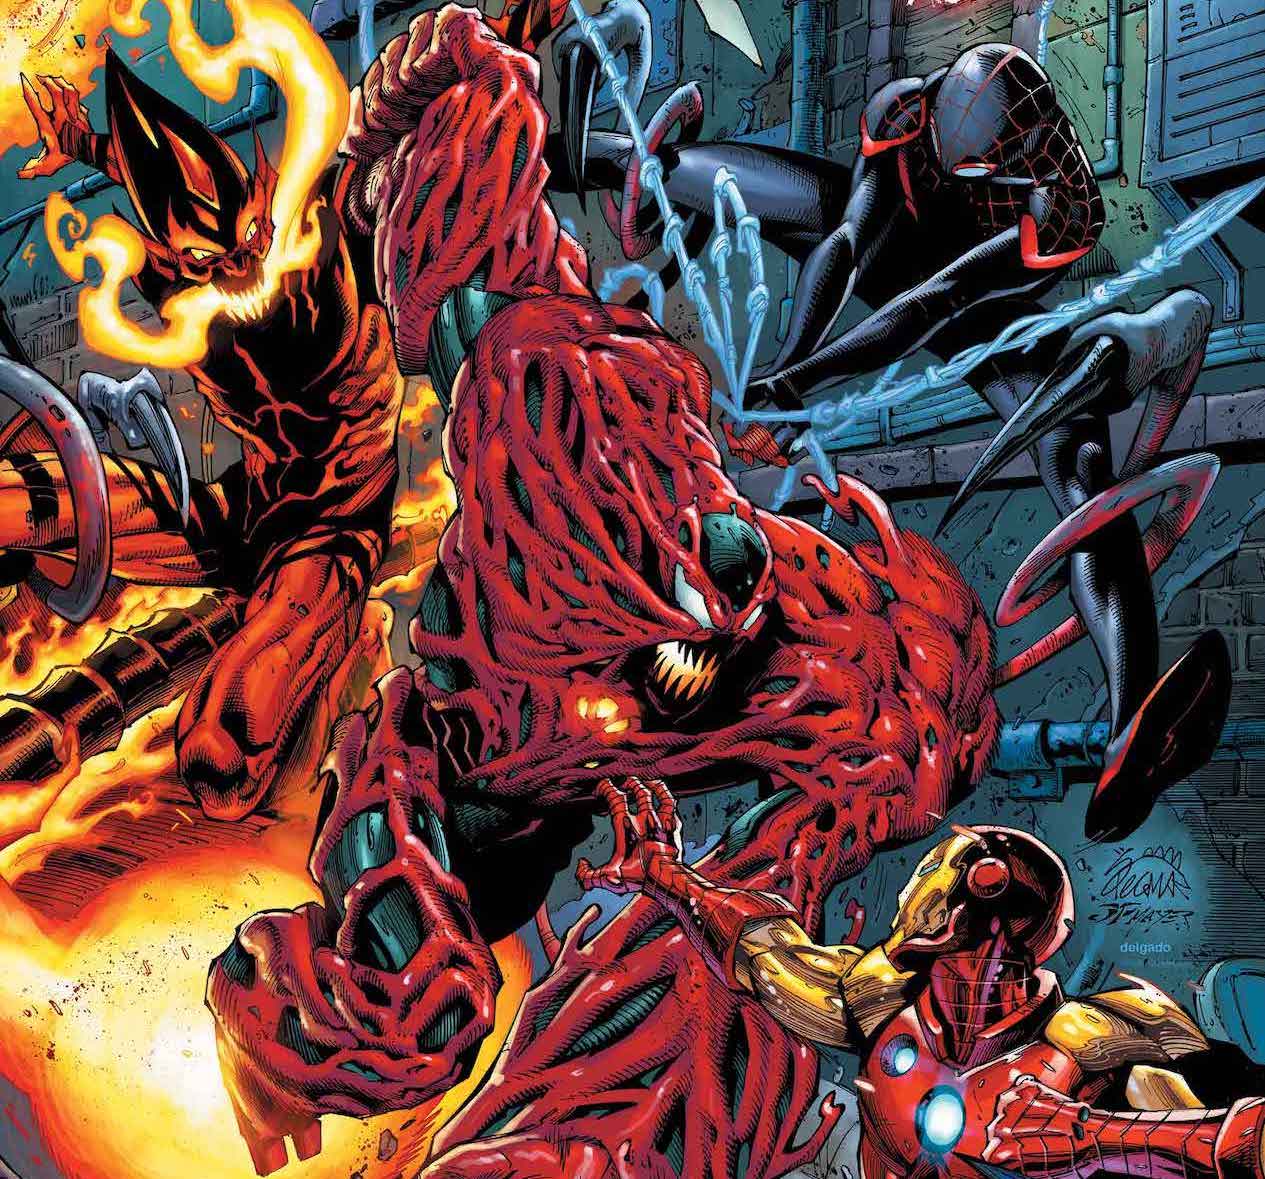 Carnage fights Miles Morales in 'Carnage Reigns' seven part crossover